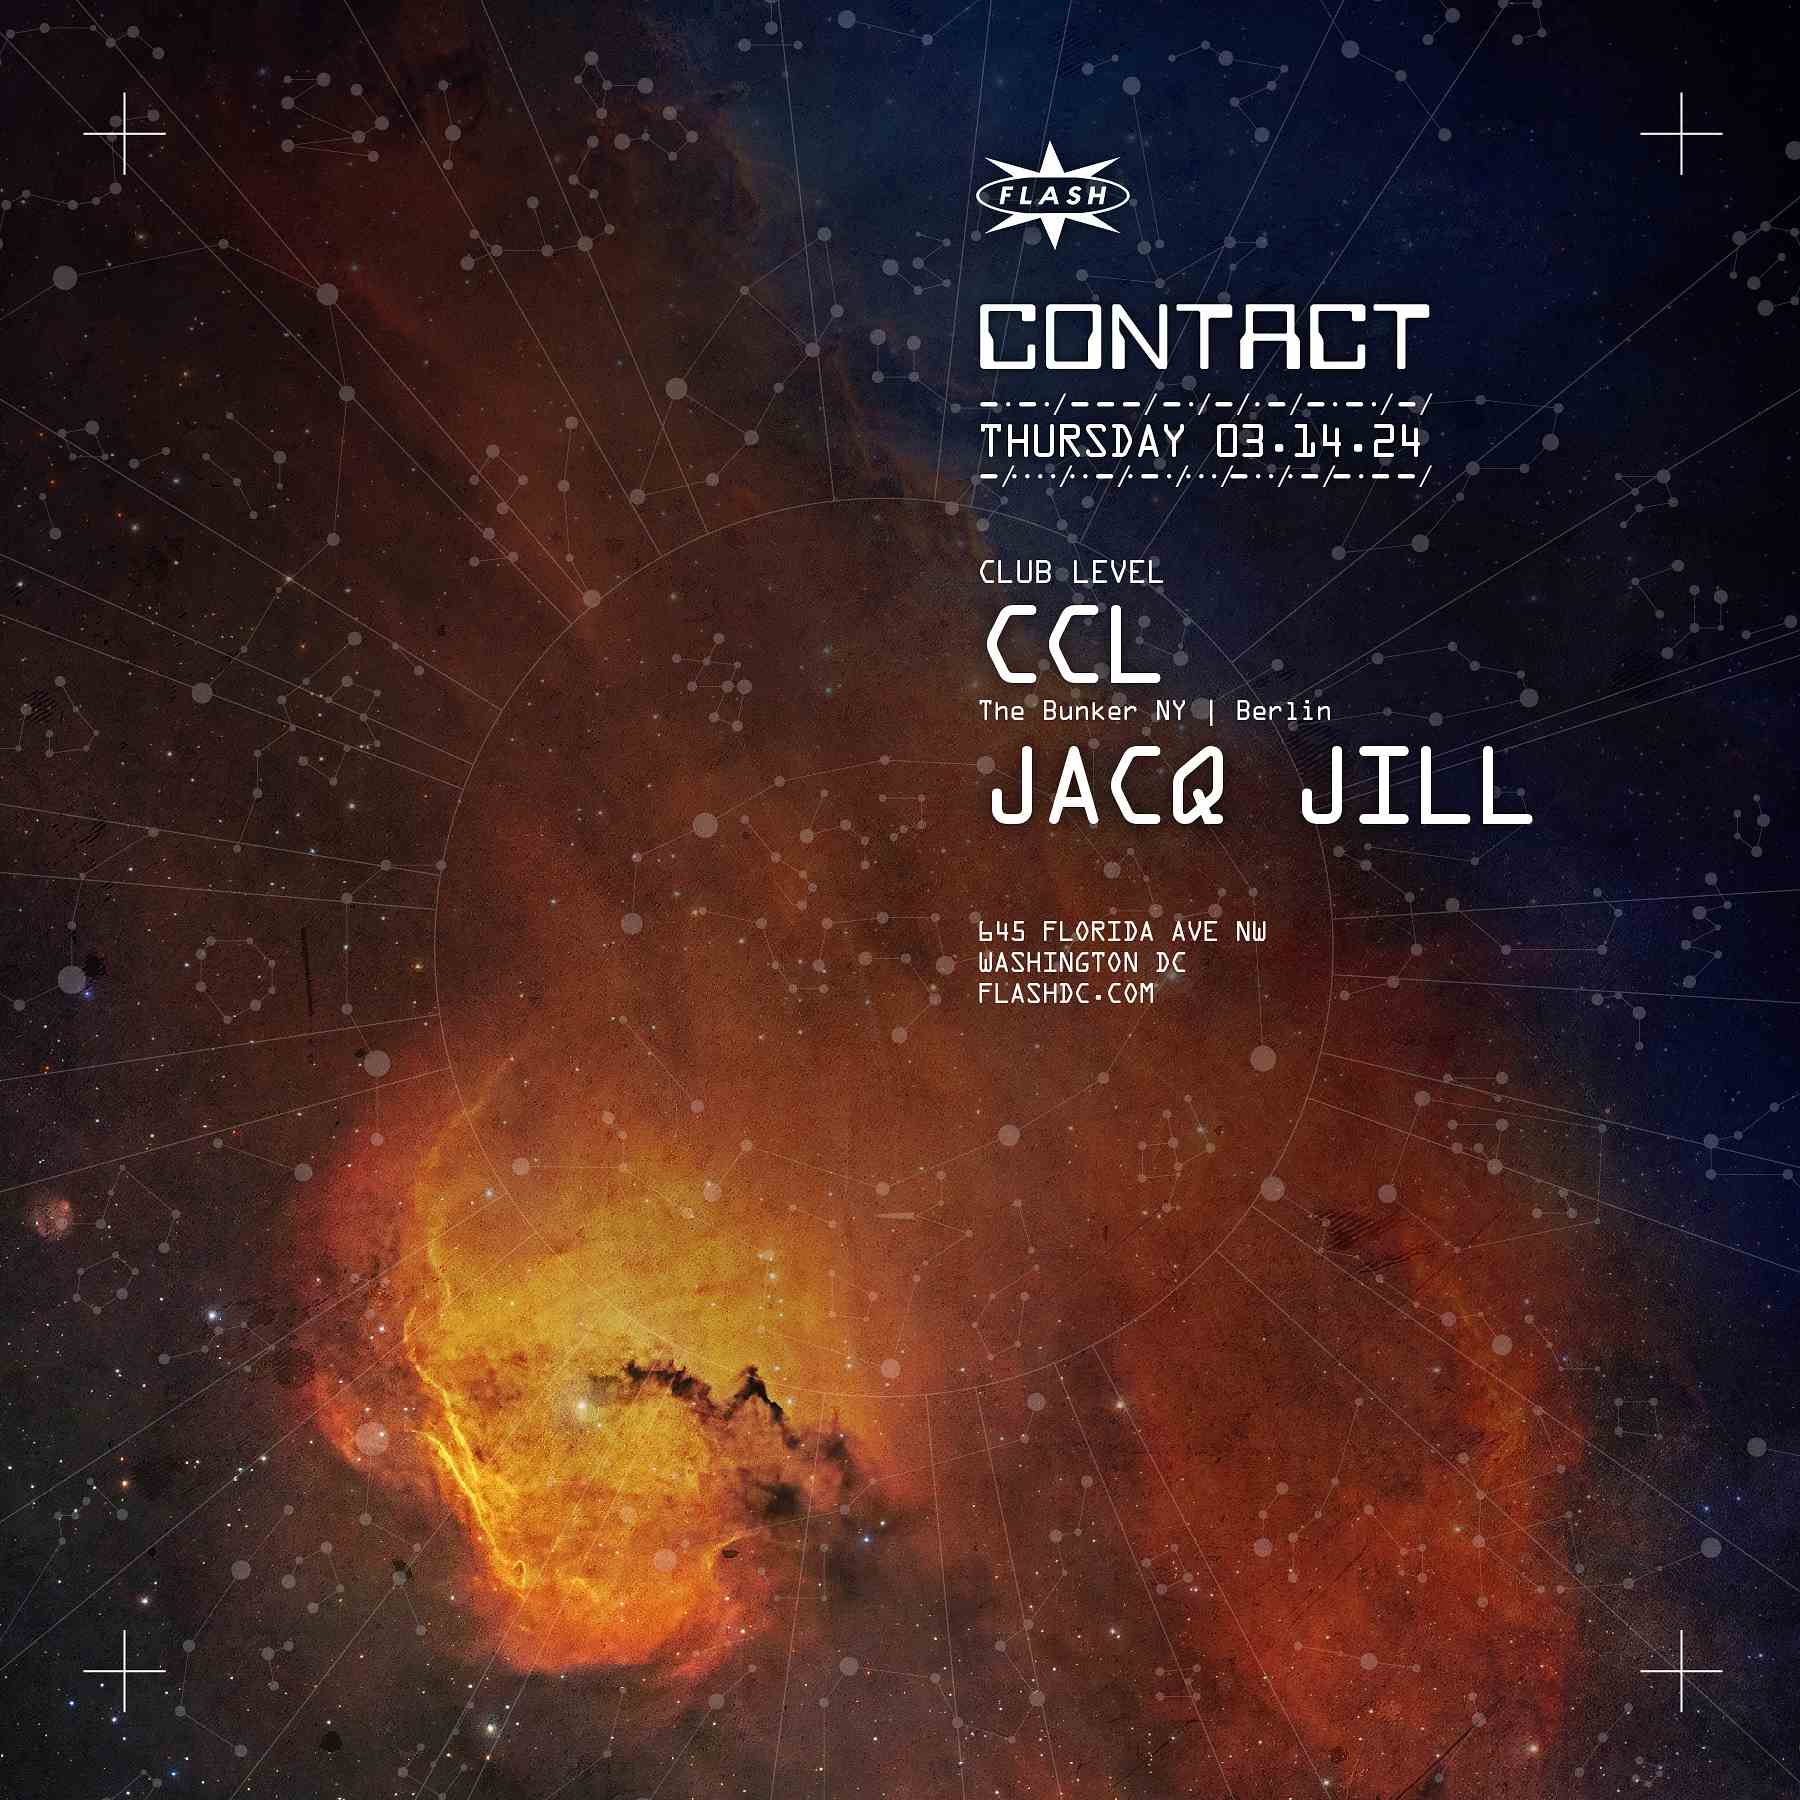 Event image for CONTACT: CCL